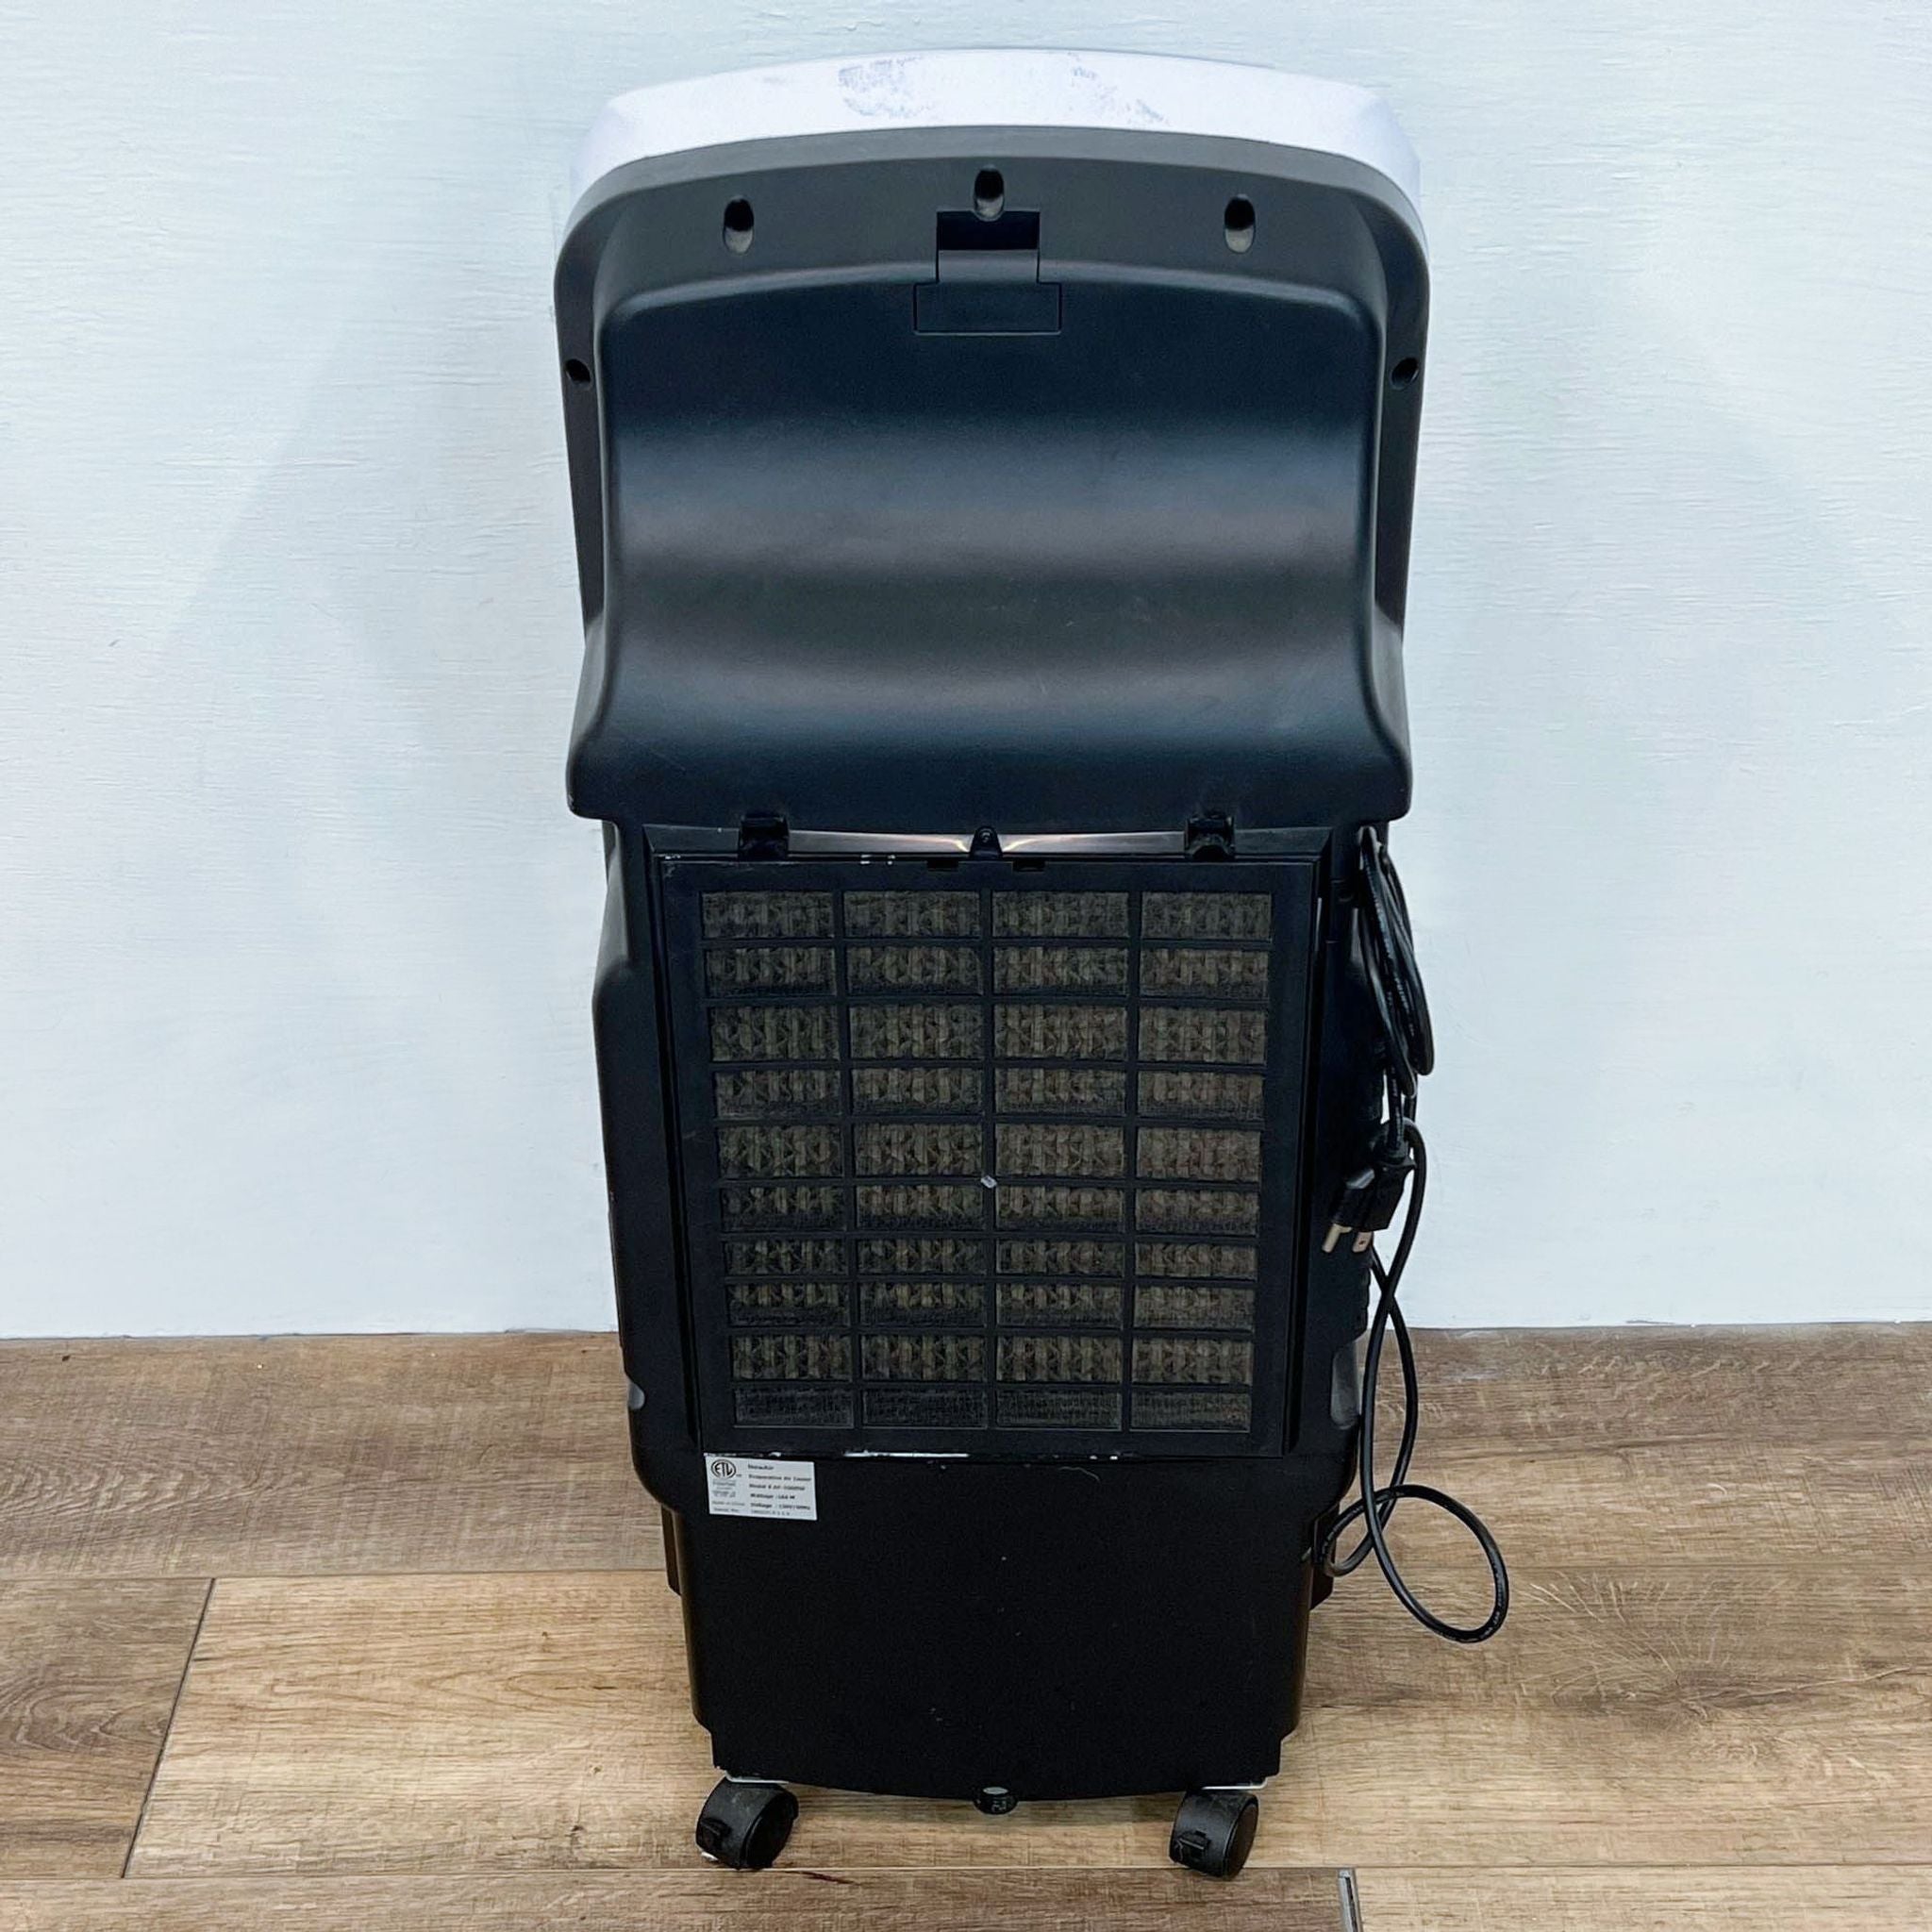 Rear view of a NewAir portable air cooler showing the black back panel, filters, and power cord on a wooden floor.